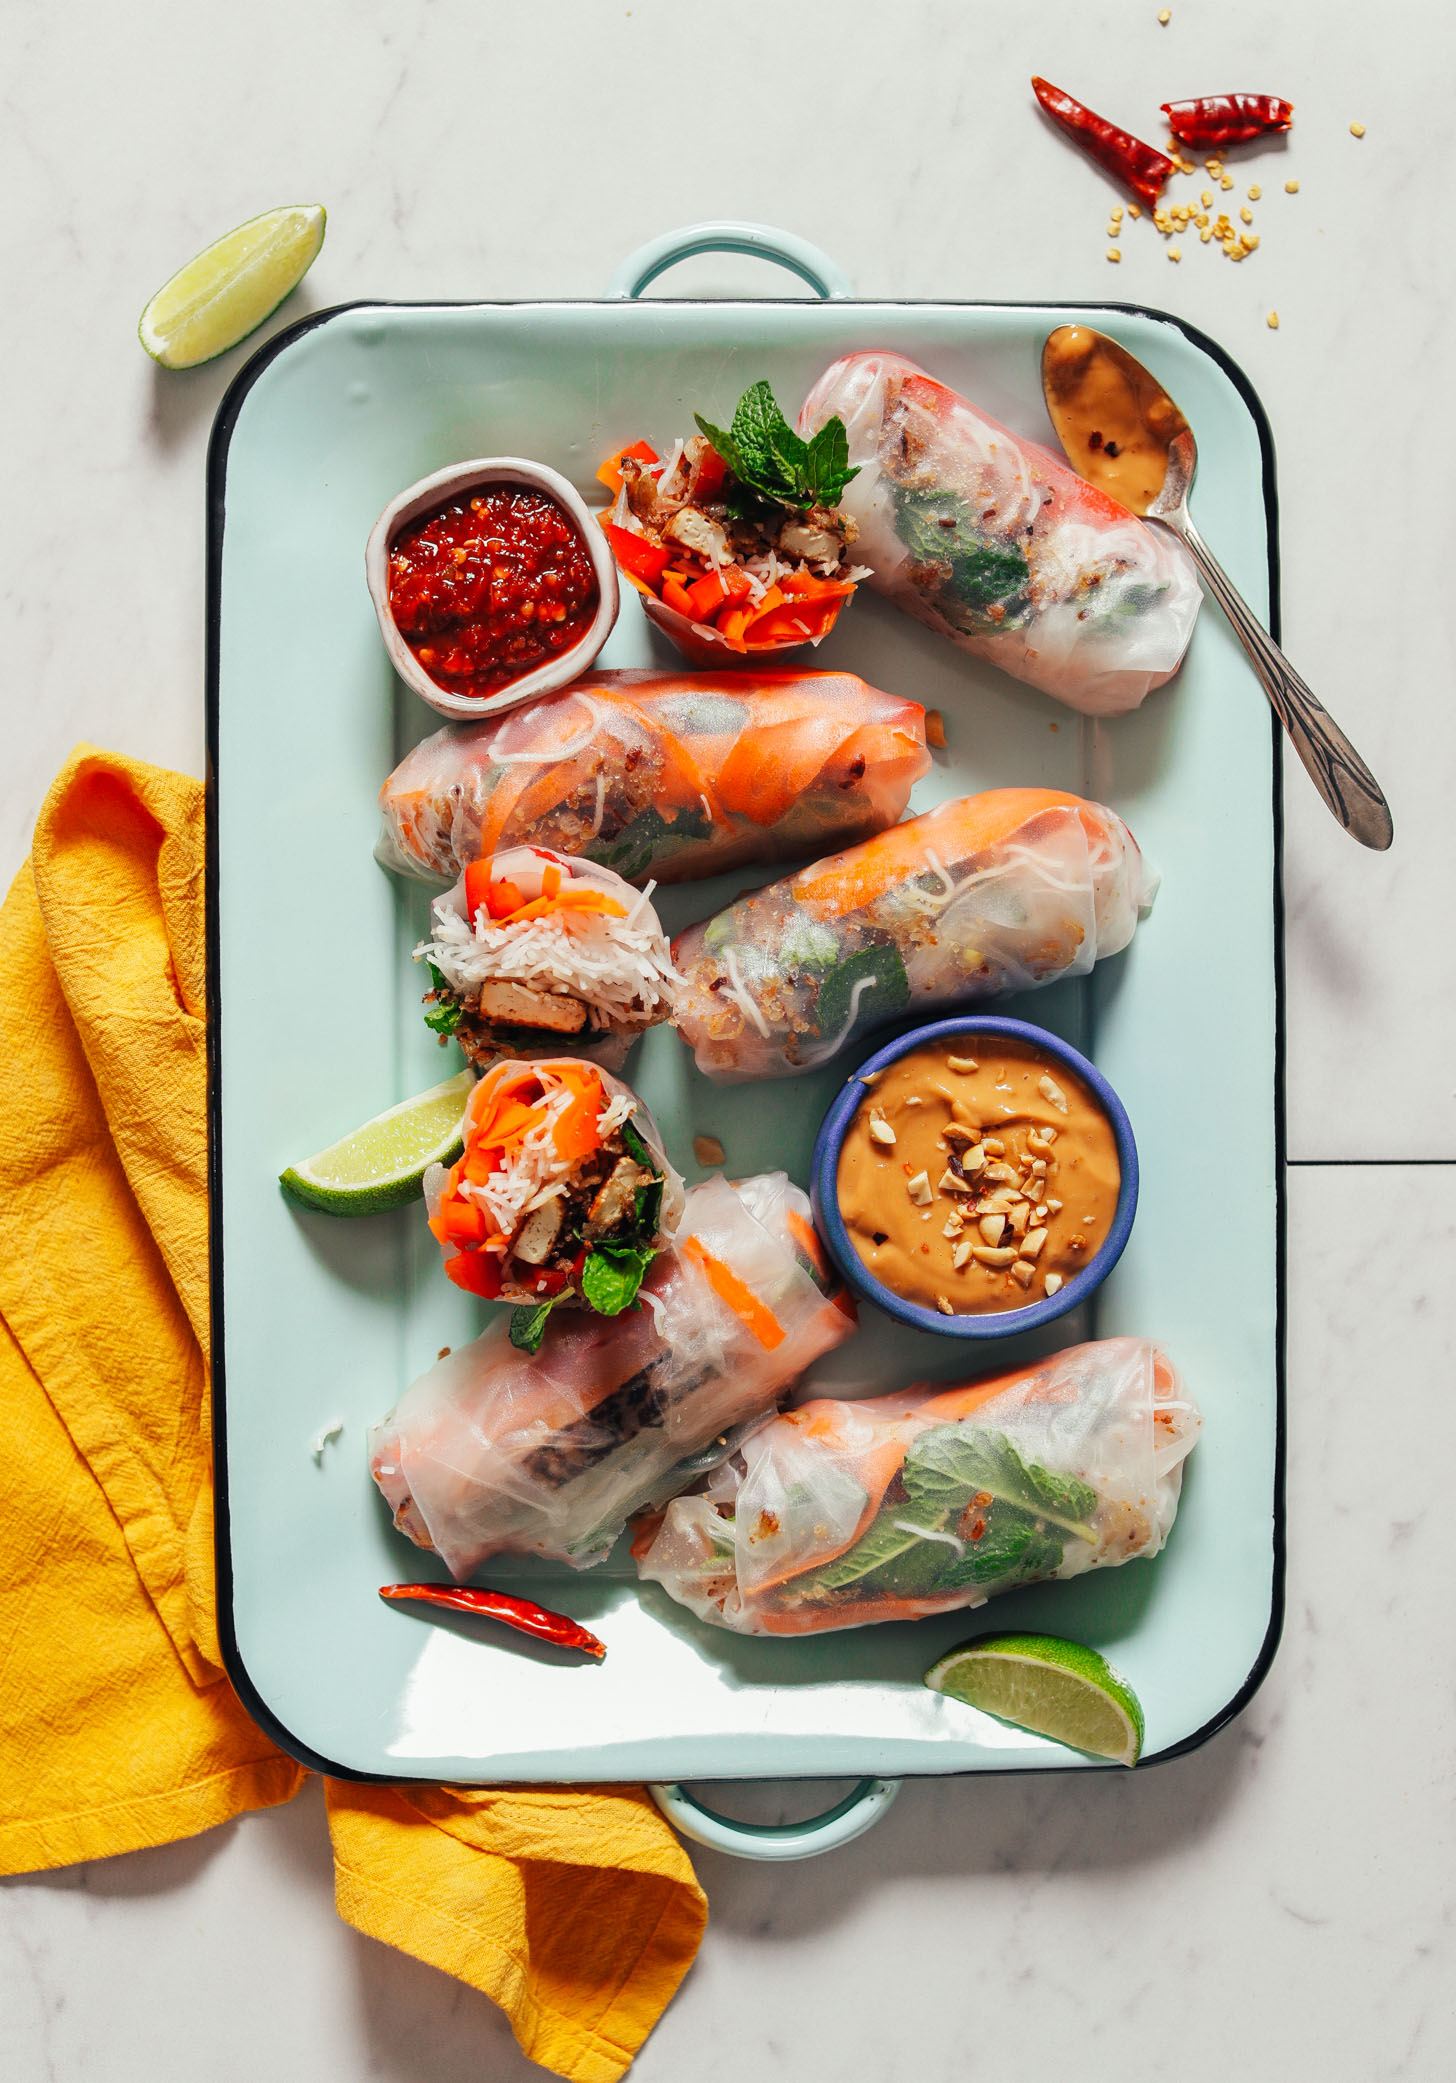 Tray of Crispy Shallot Spring Rolls made with Seared Tofu and fresh vegetables